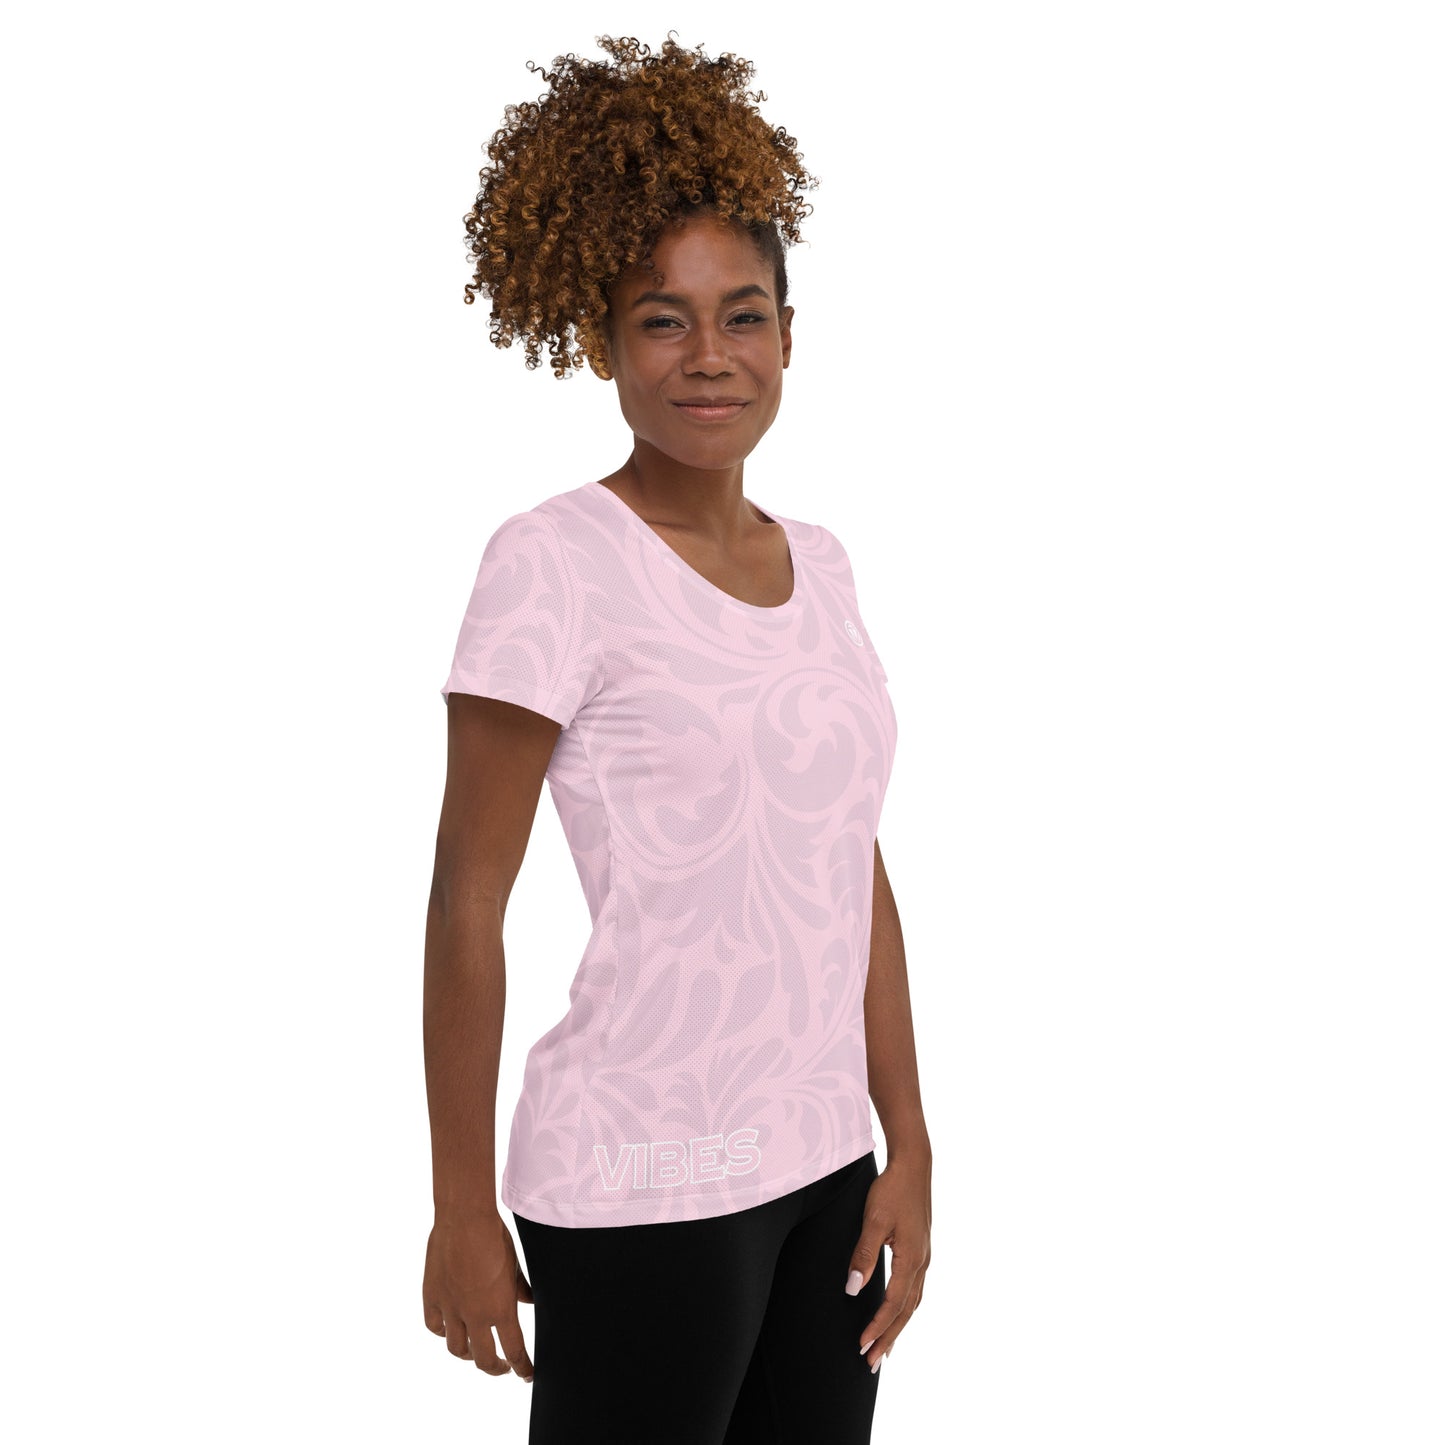 TIME OF VIBES - Women's Athletic T-shirt FLORAL (Pink) - €45.00